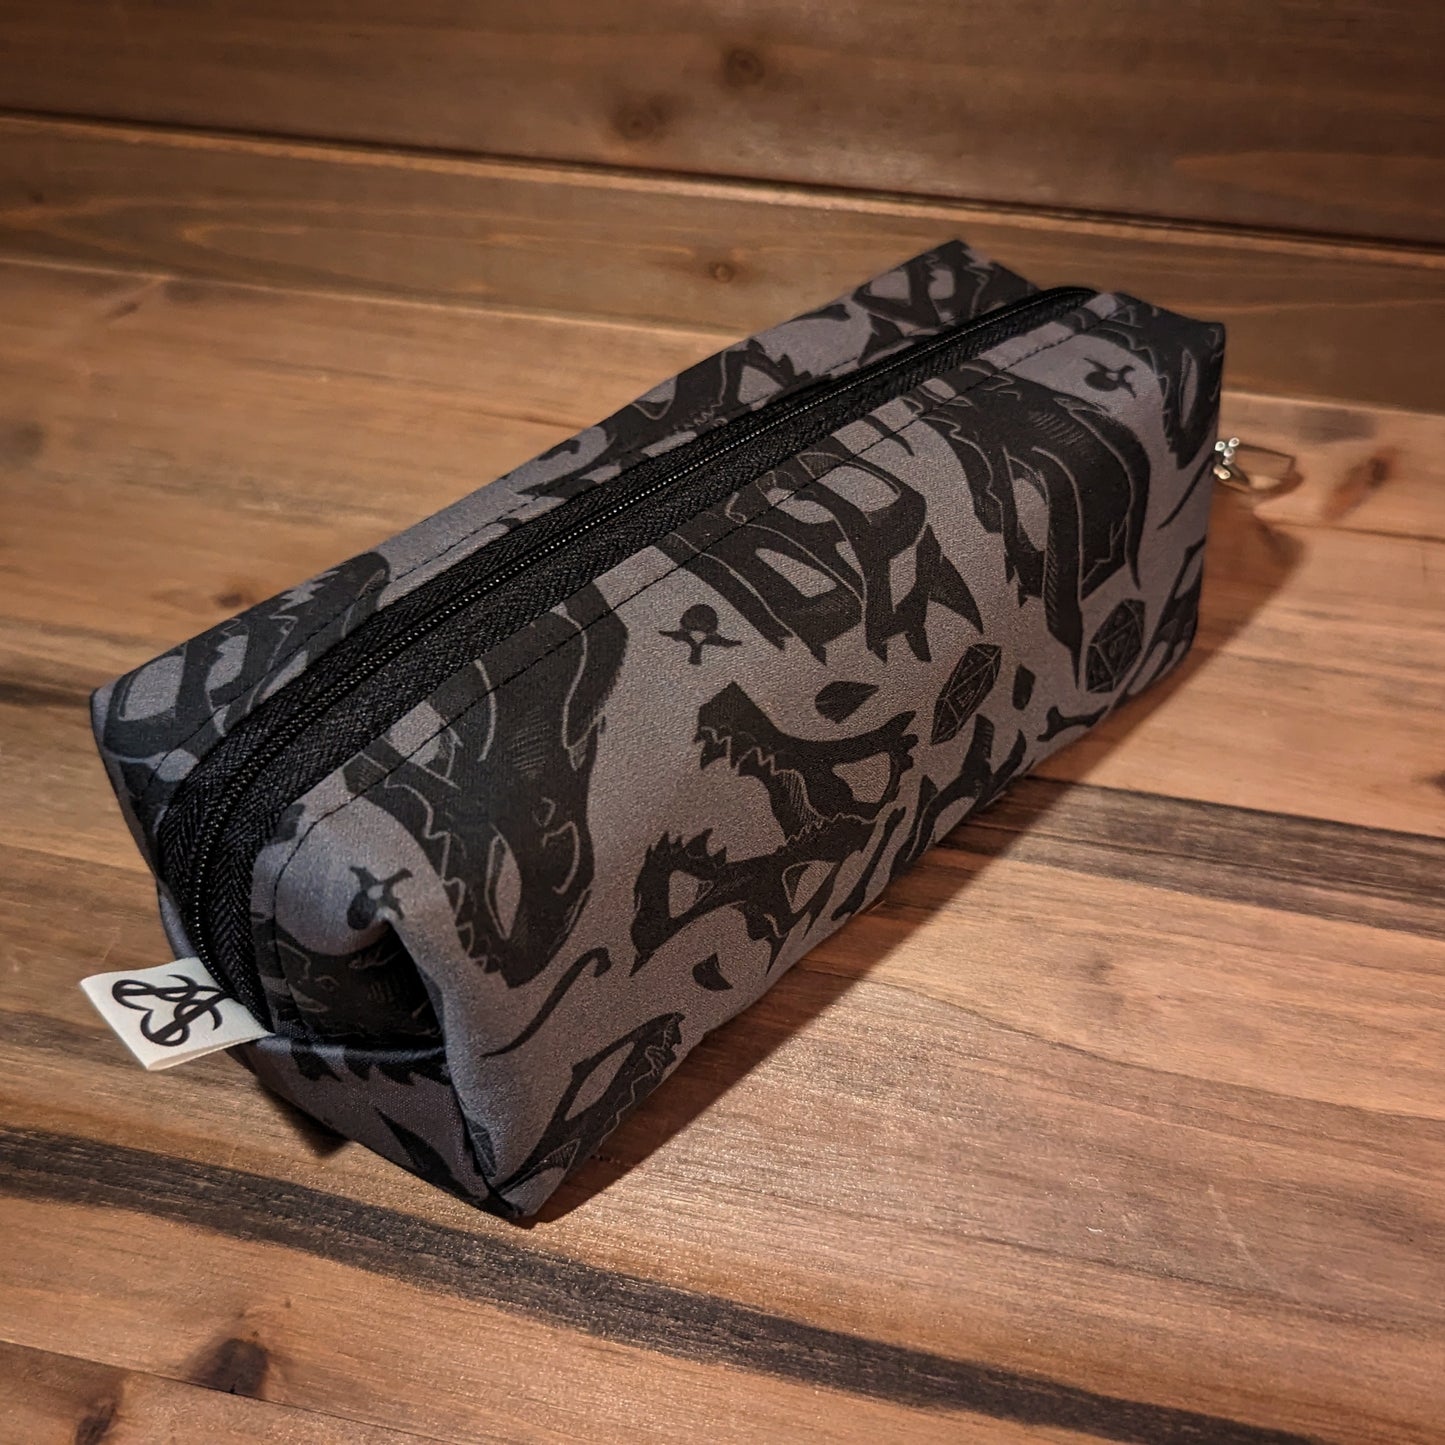 A 7 inch long bag has 2.5 inch square ends with black and grey dragon skull and D20 print fabric on the outside, and a black zipper running long ways from the keychain clip at the top to the Aras Sivad Studio logo at the bottom.